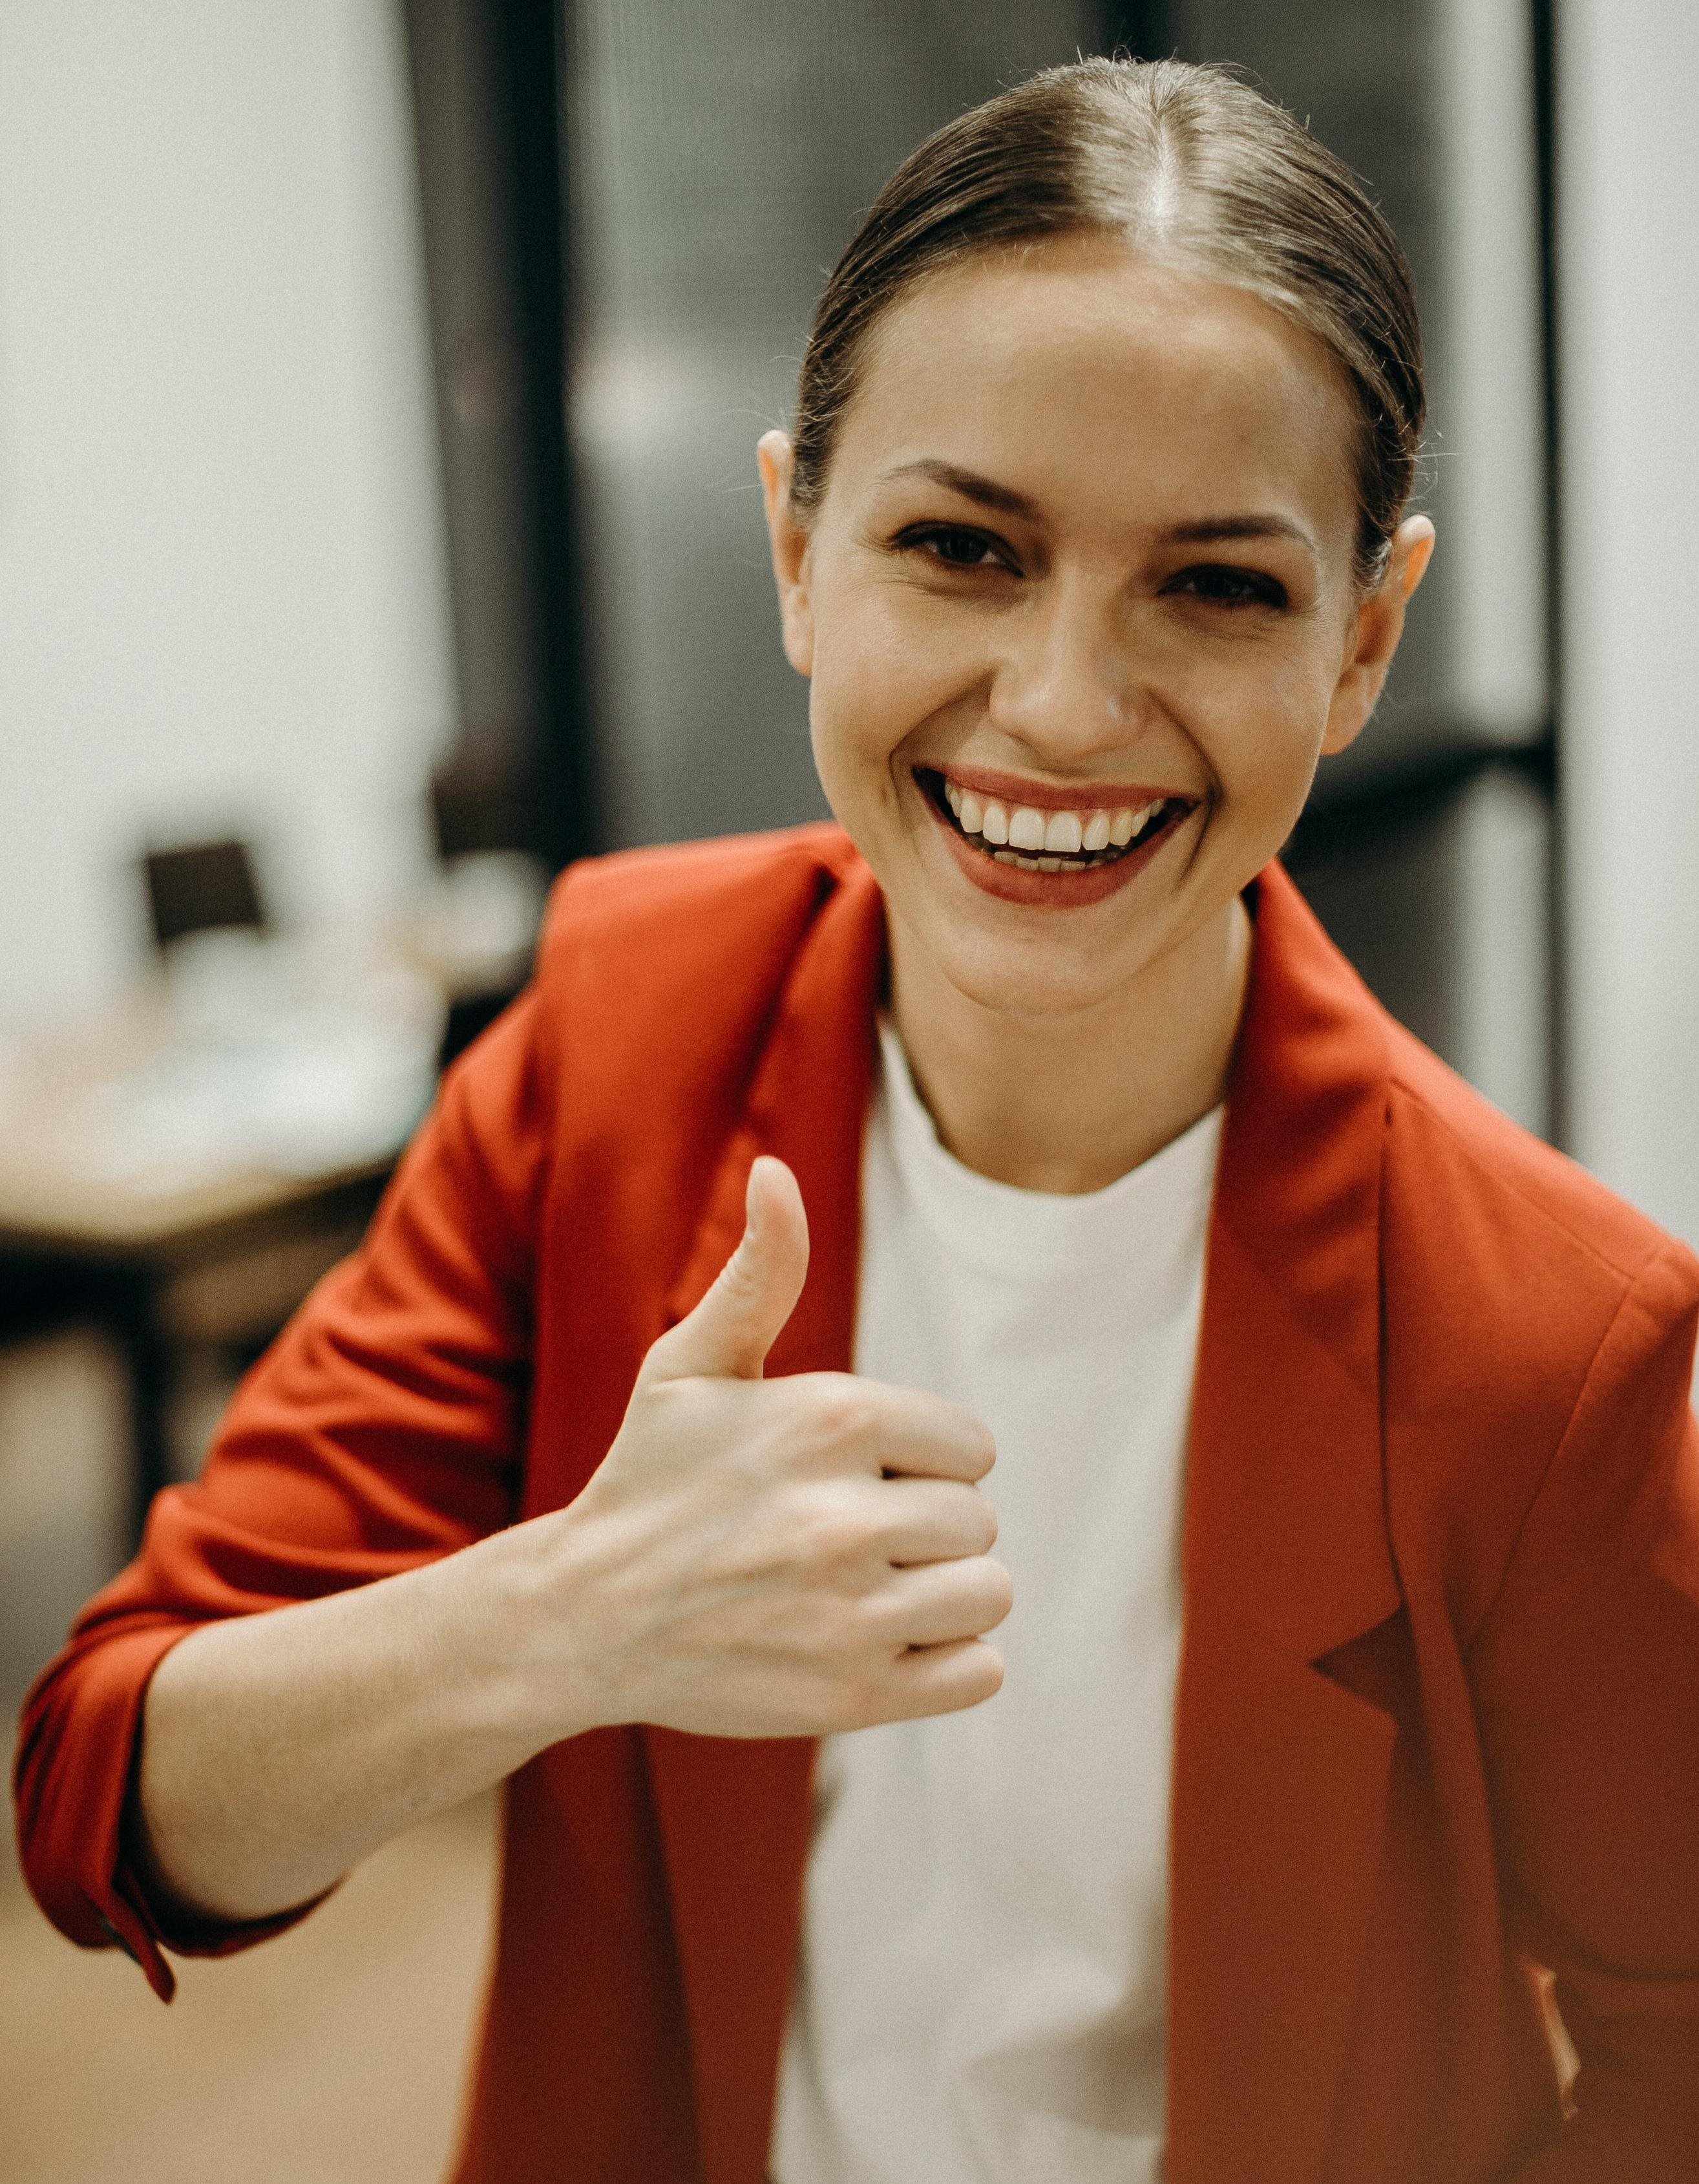 Smiling woman showing thumps up